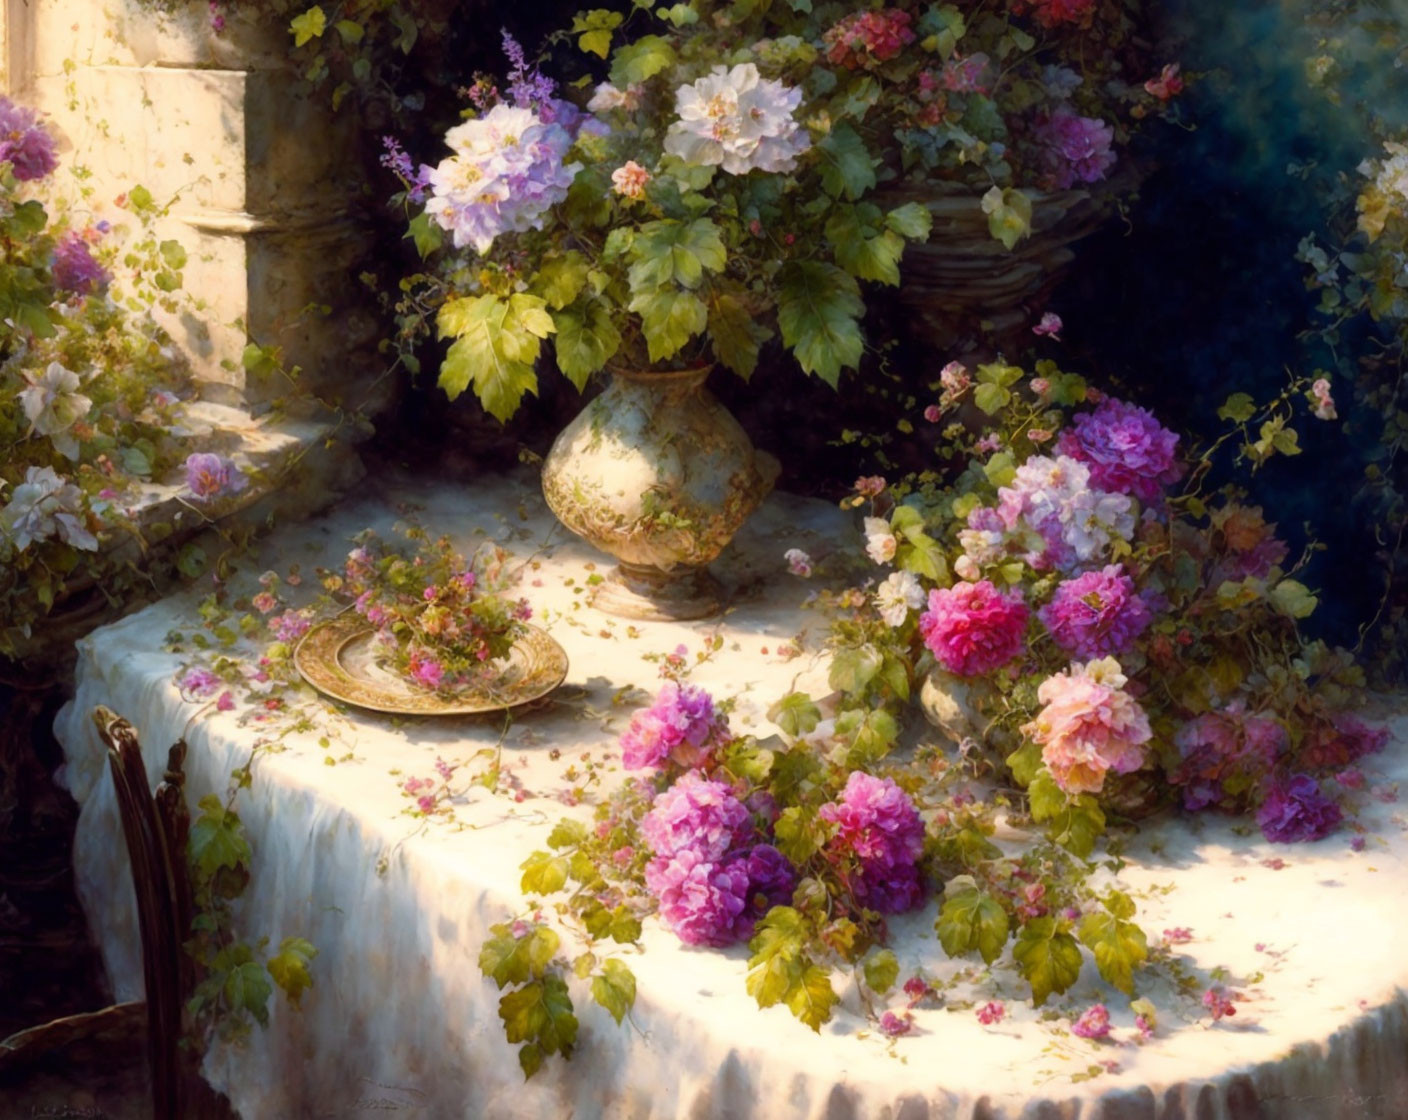 Romantic sunlit garden scene with rustic table and colorful blooms